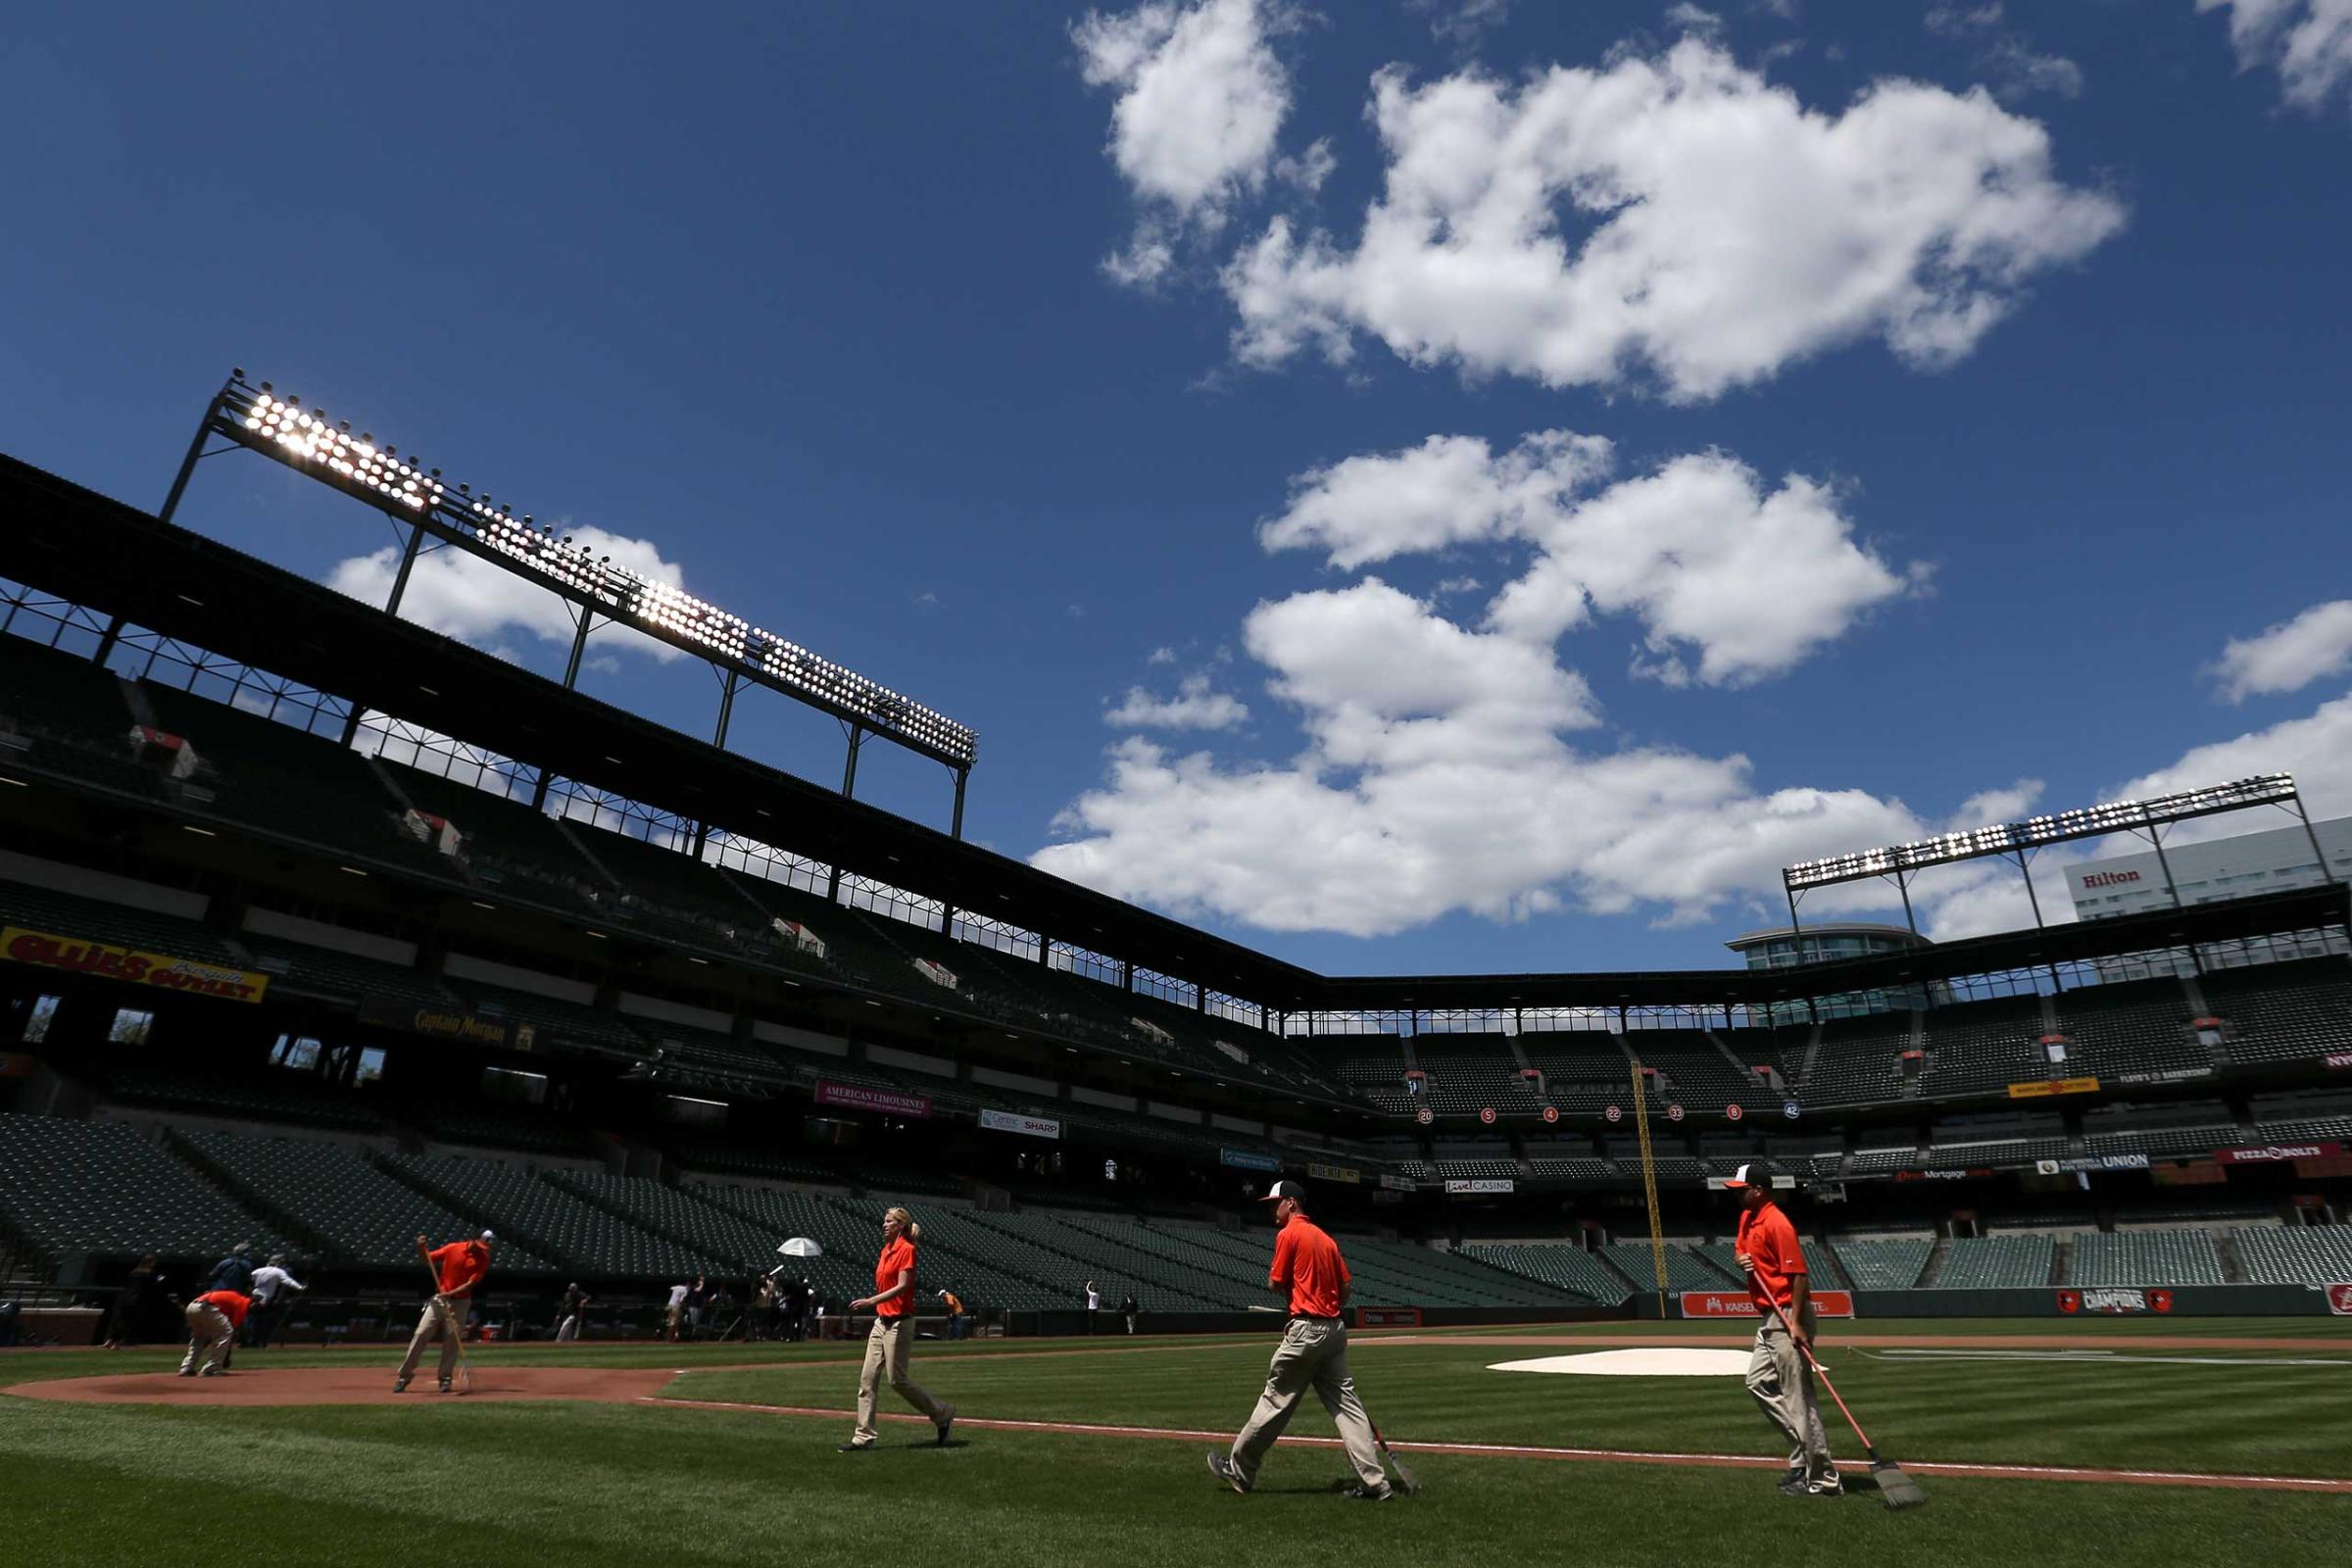 The grounds crew prepares the field before the Baltimore Orioles play the Chicago White Sox at an empty Oriole Park at Camden Yards in Baltimore on April 29, 2015.